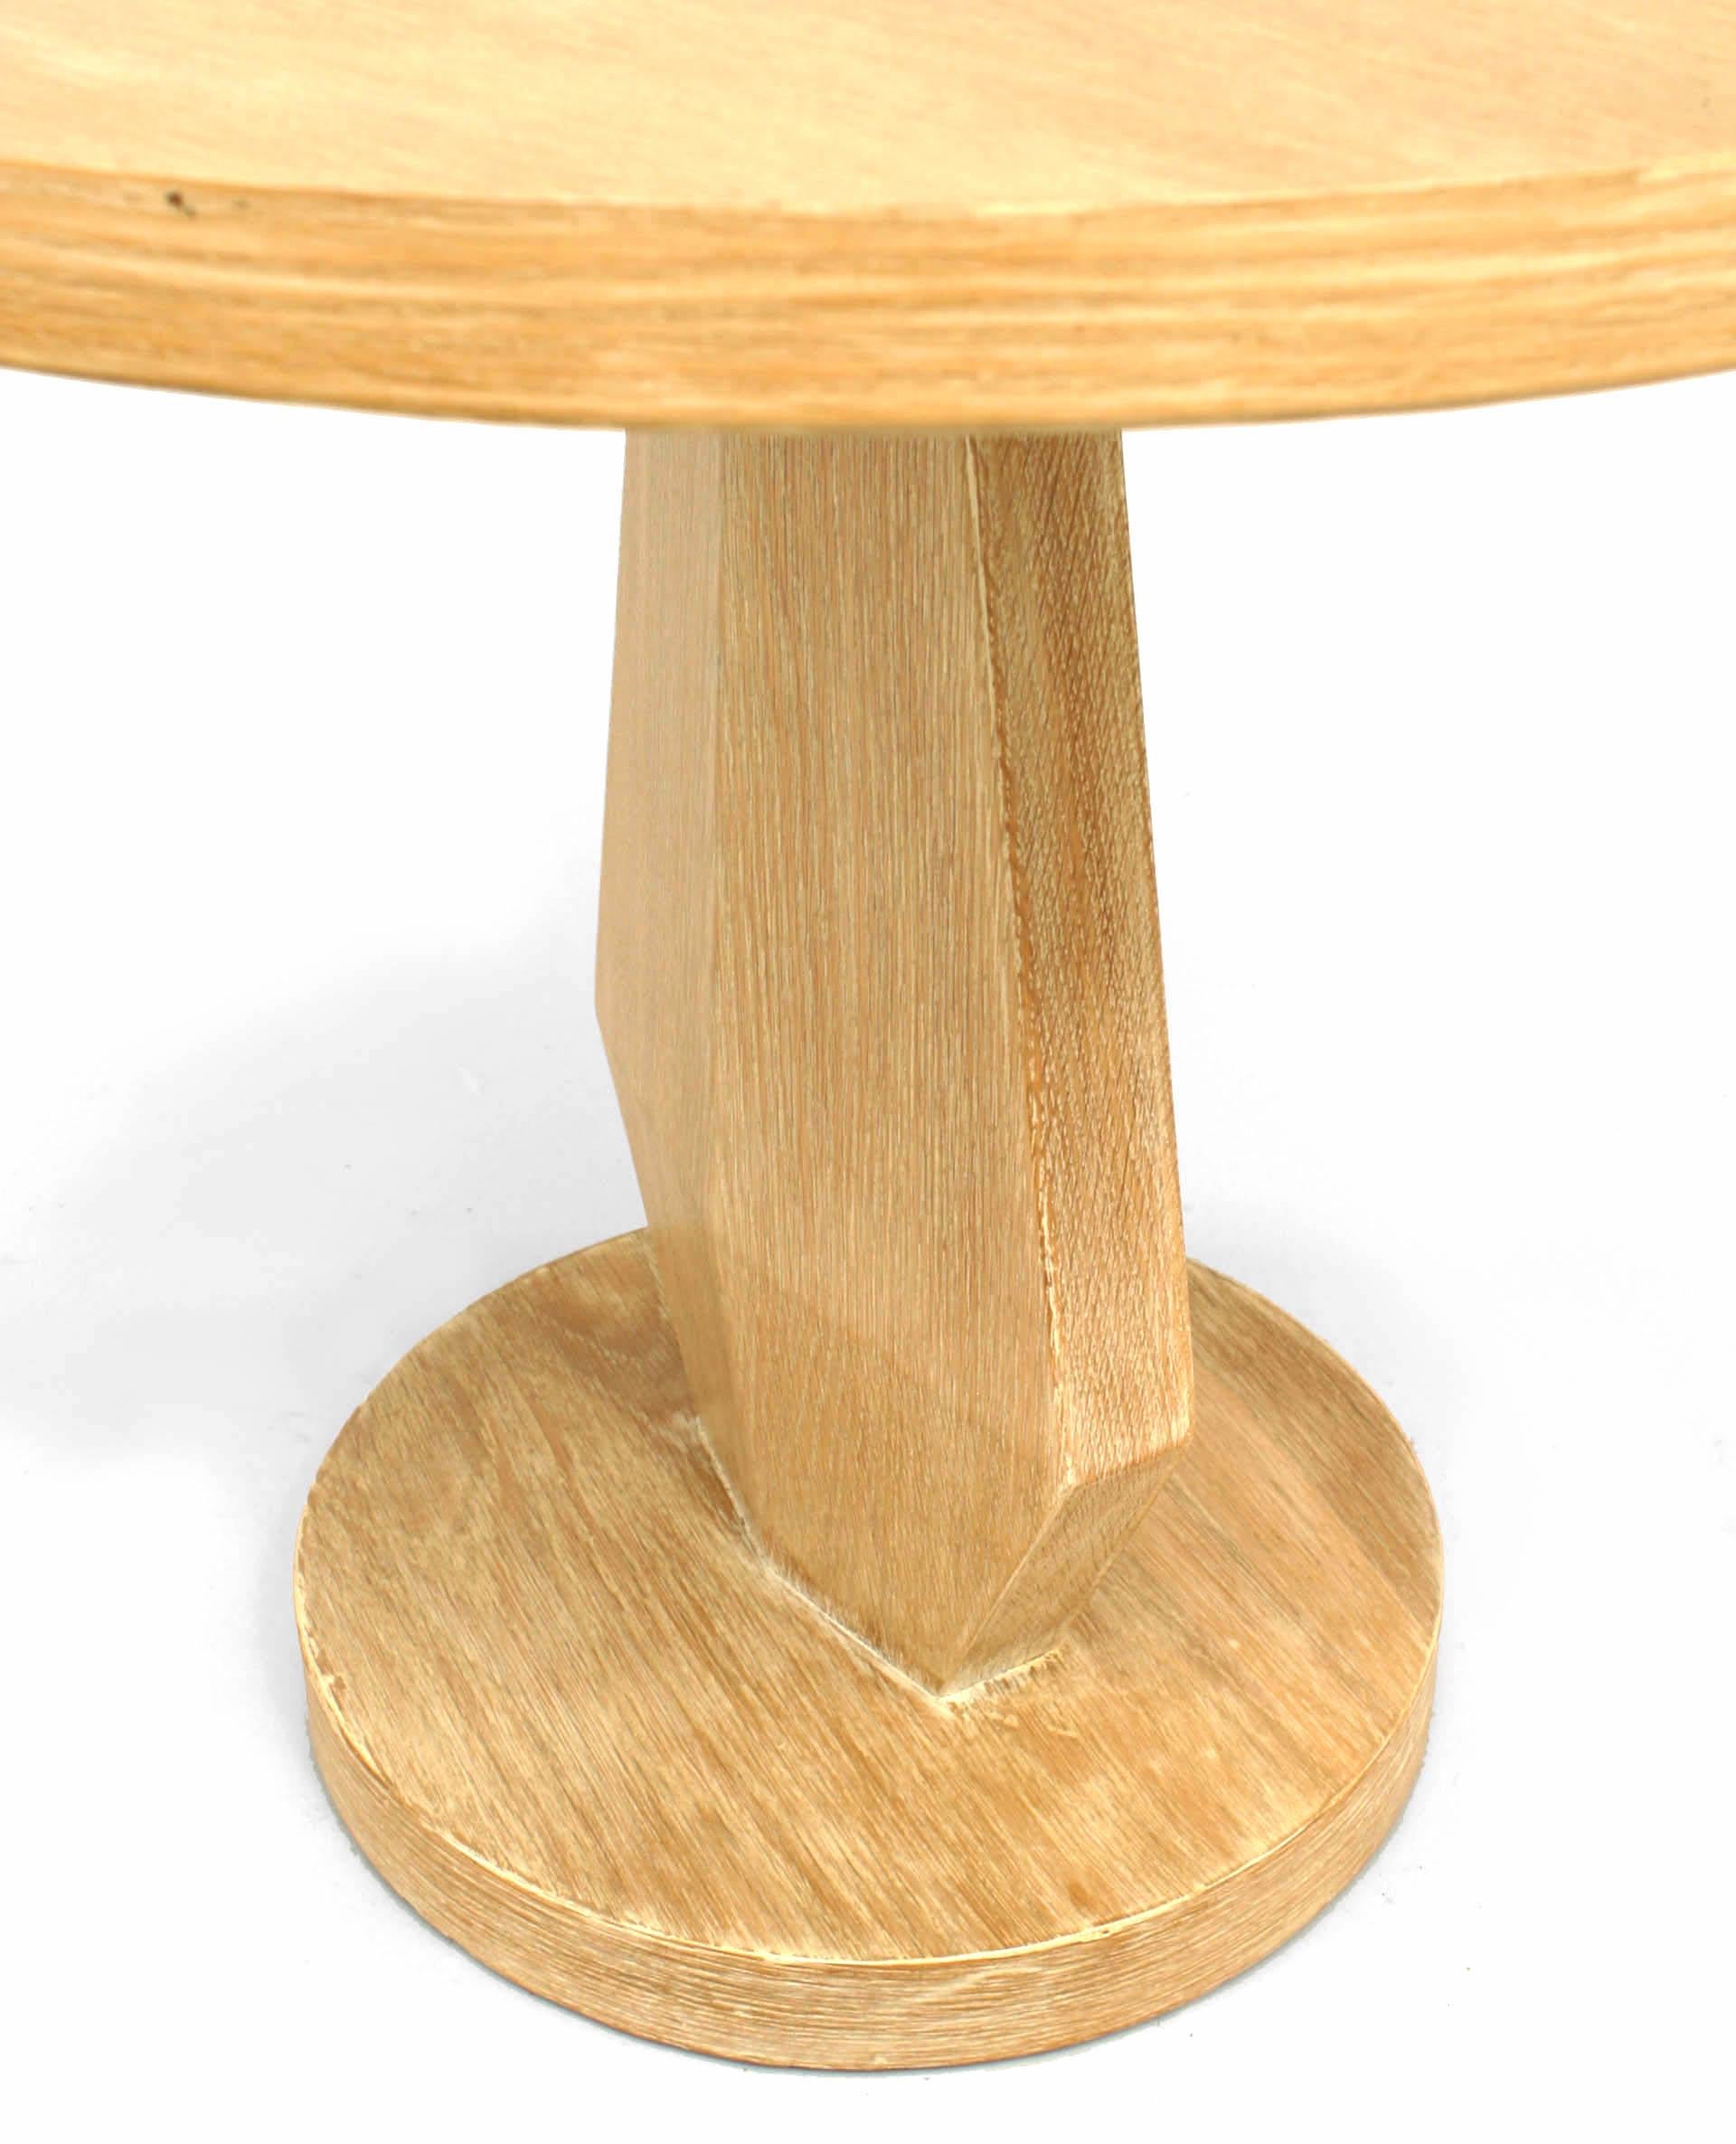 Mid-20th Century American Mid-Century Limewood Round End Table For Sale